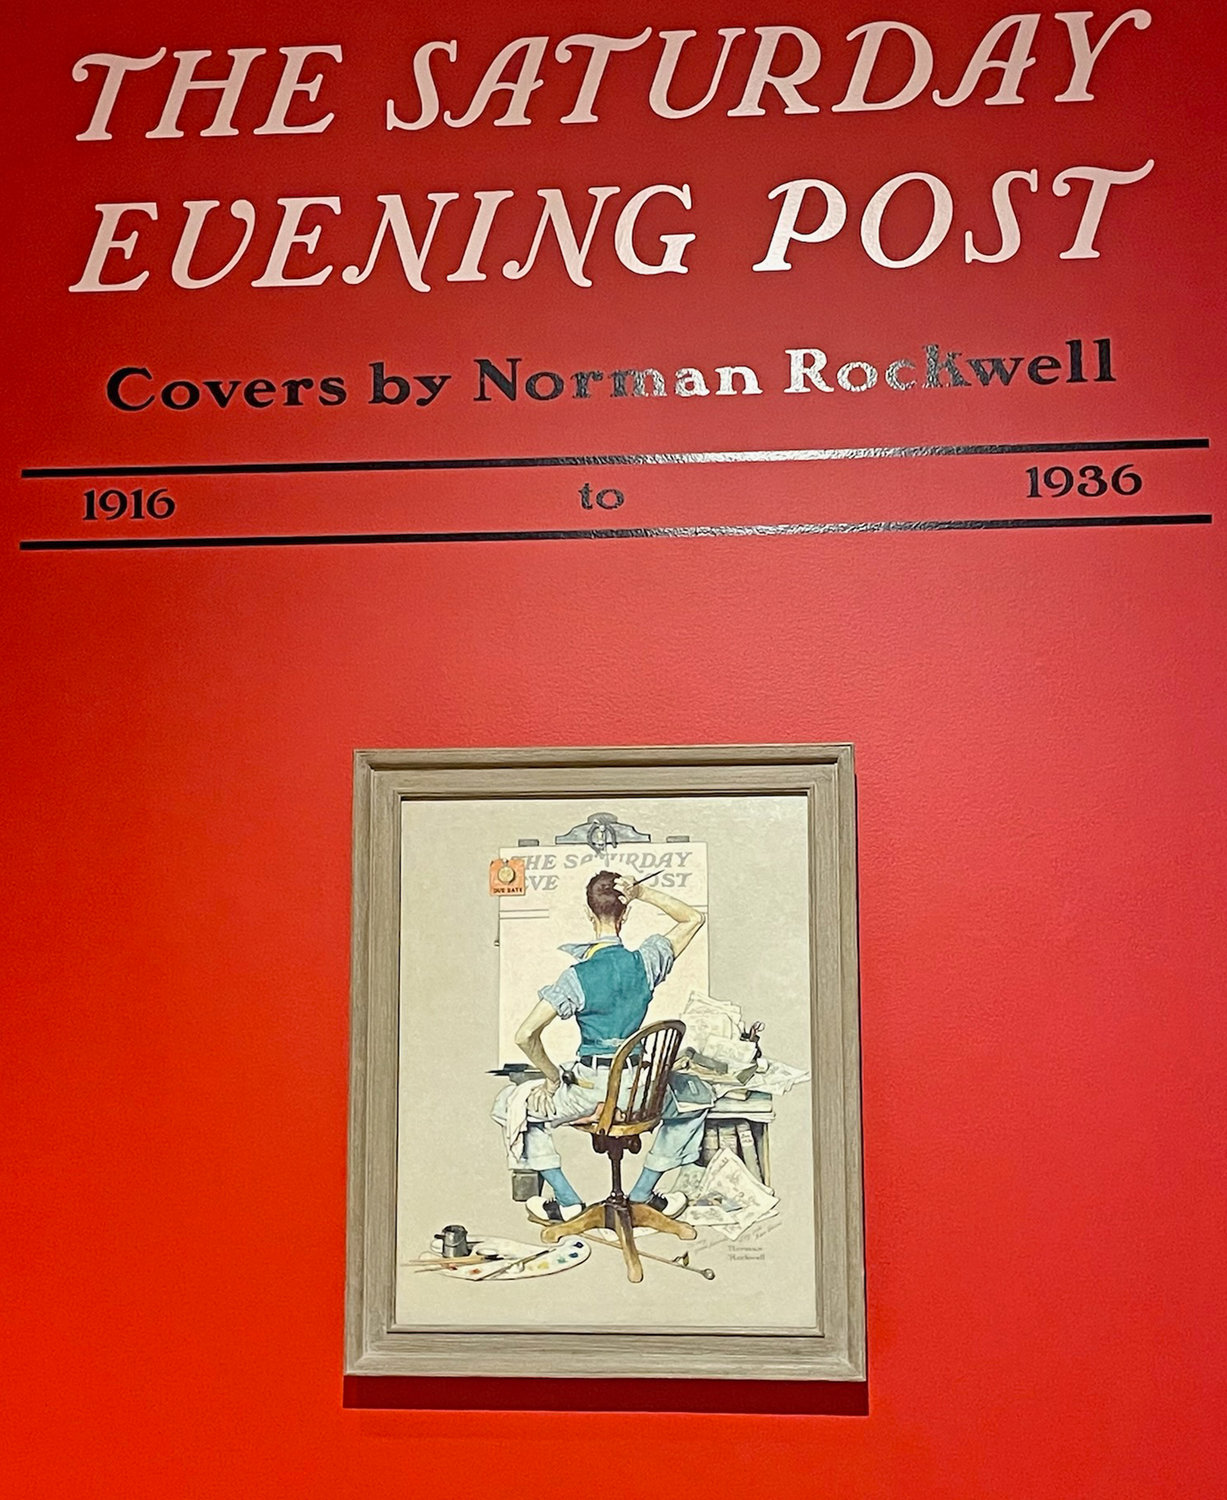 One of the famous self-illustrations painted by Norman Rockwell is the main focal point inside one of the exhibition rooms at Munson-Williams-Proctor Arts Institute in Utica.